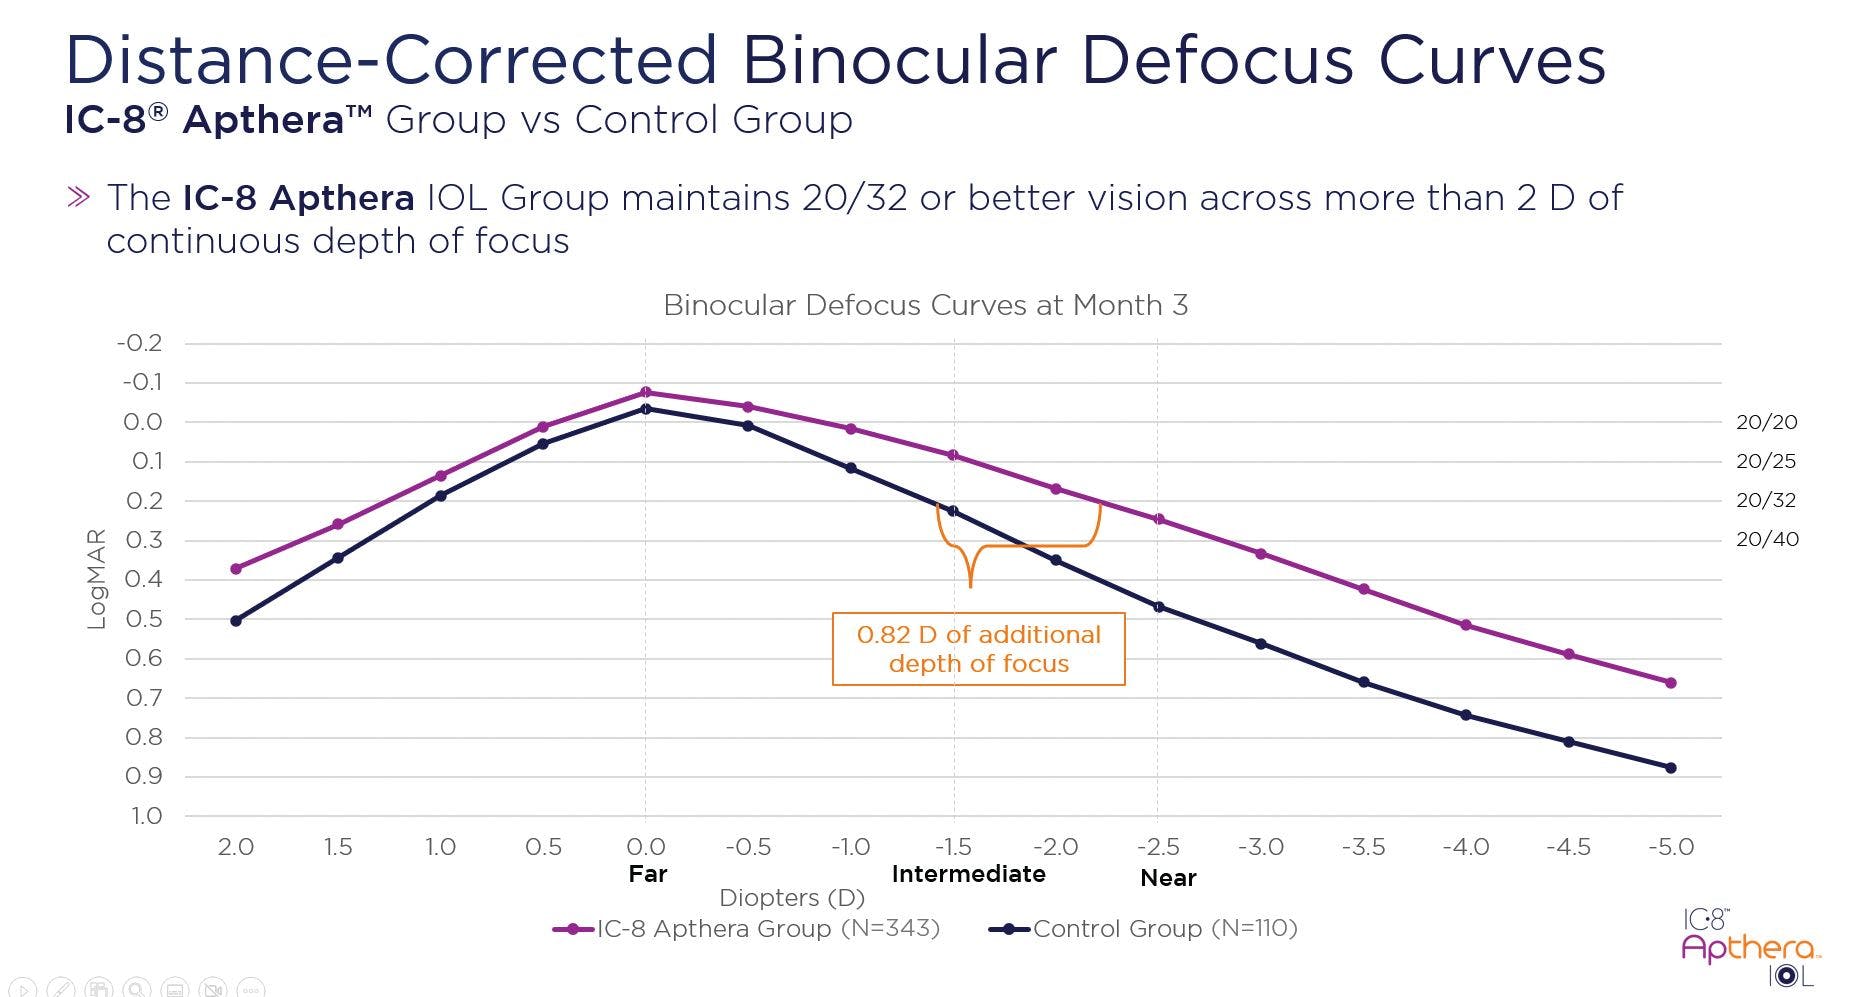 Figure 3. Distance-corrected binocular defocus curve for Apthera IOL patients (n = 343) vs control group patients with bilateral monofocal IOLs (n = 110).